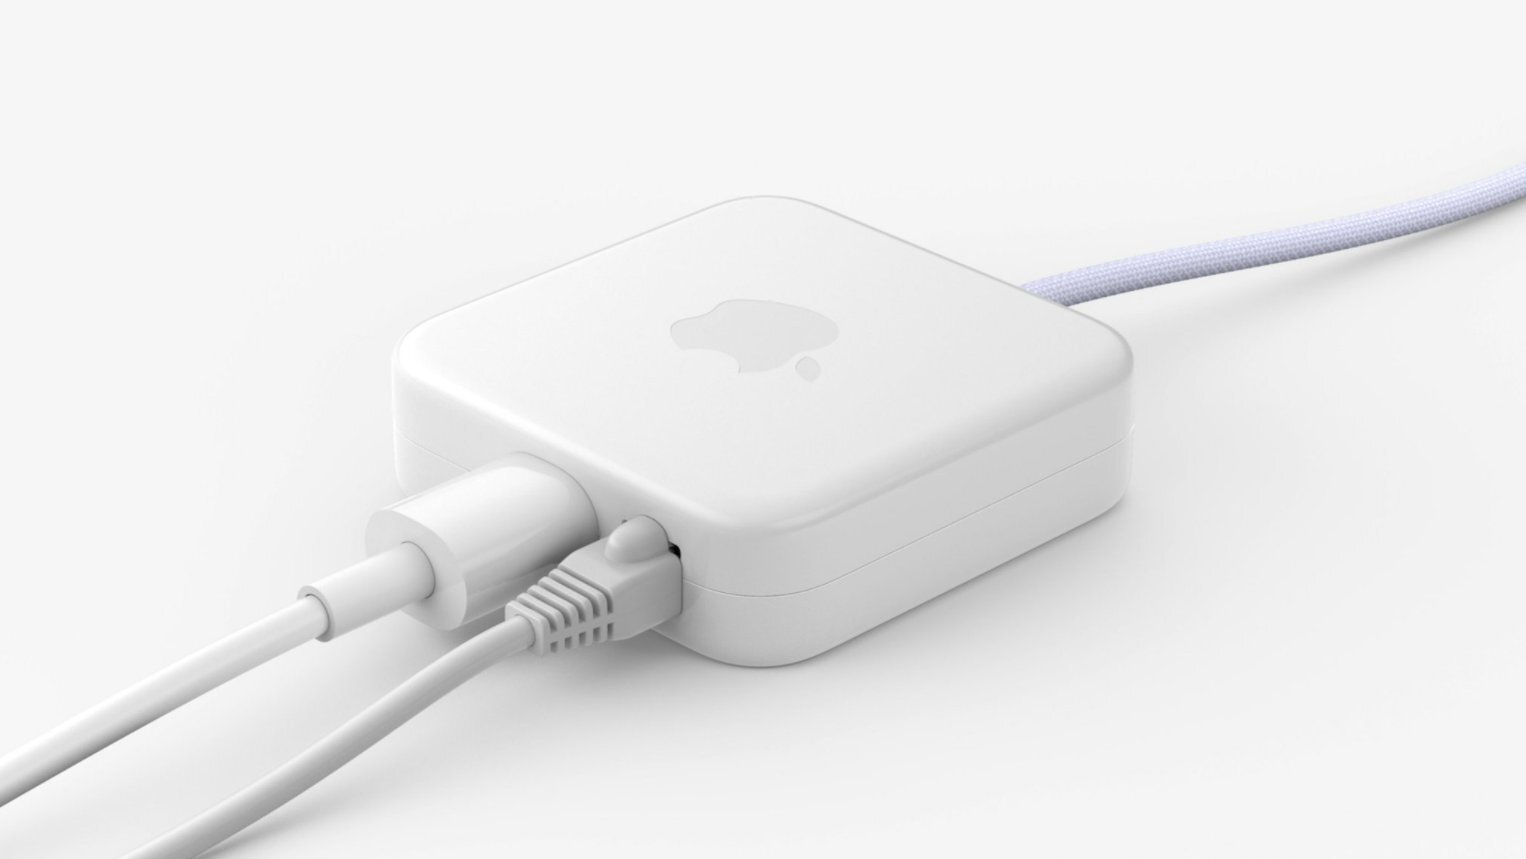 Apple's new iMac features power adapter with builtin port